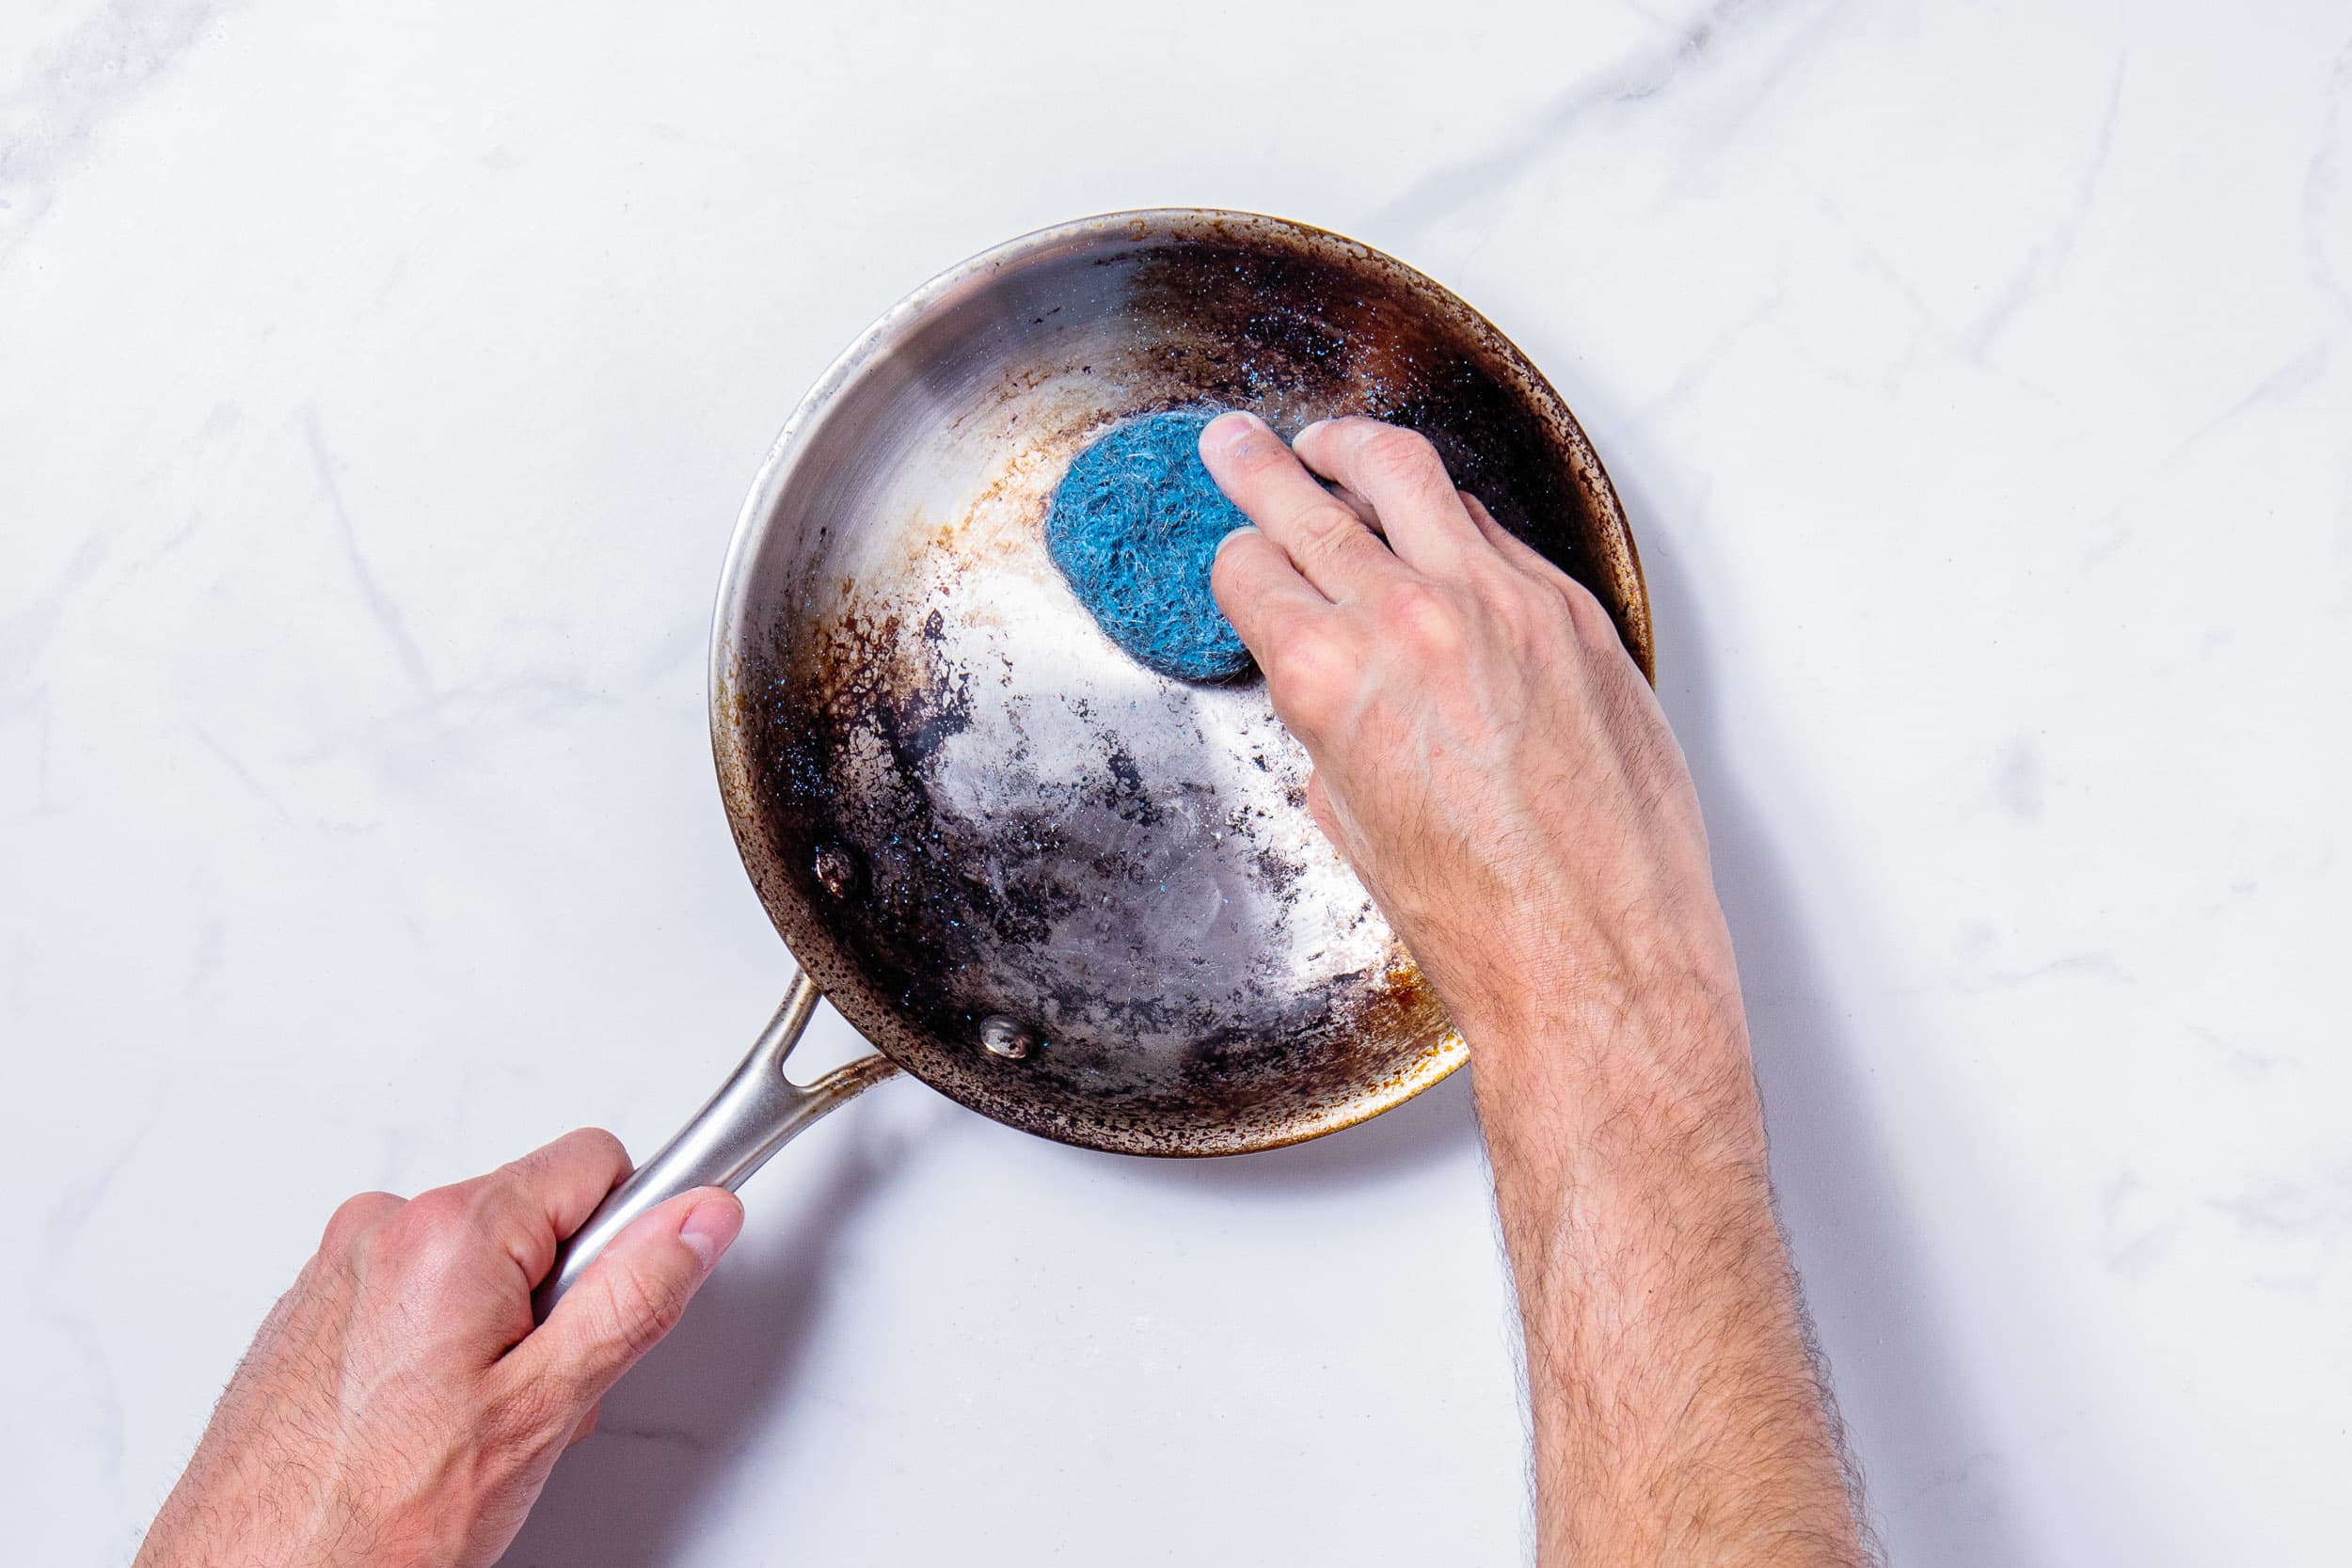 How to Clean Stainless-Steel Pans to Keep Them Looking Brand-New